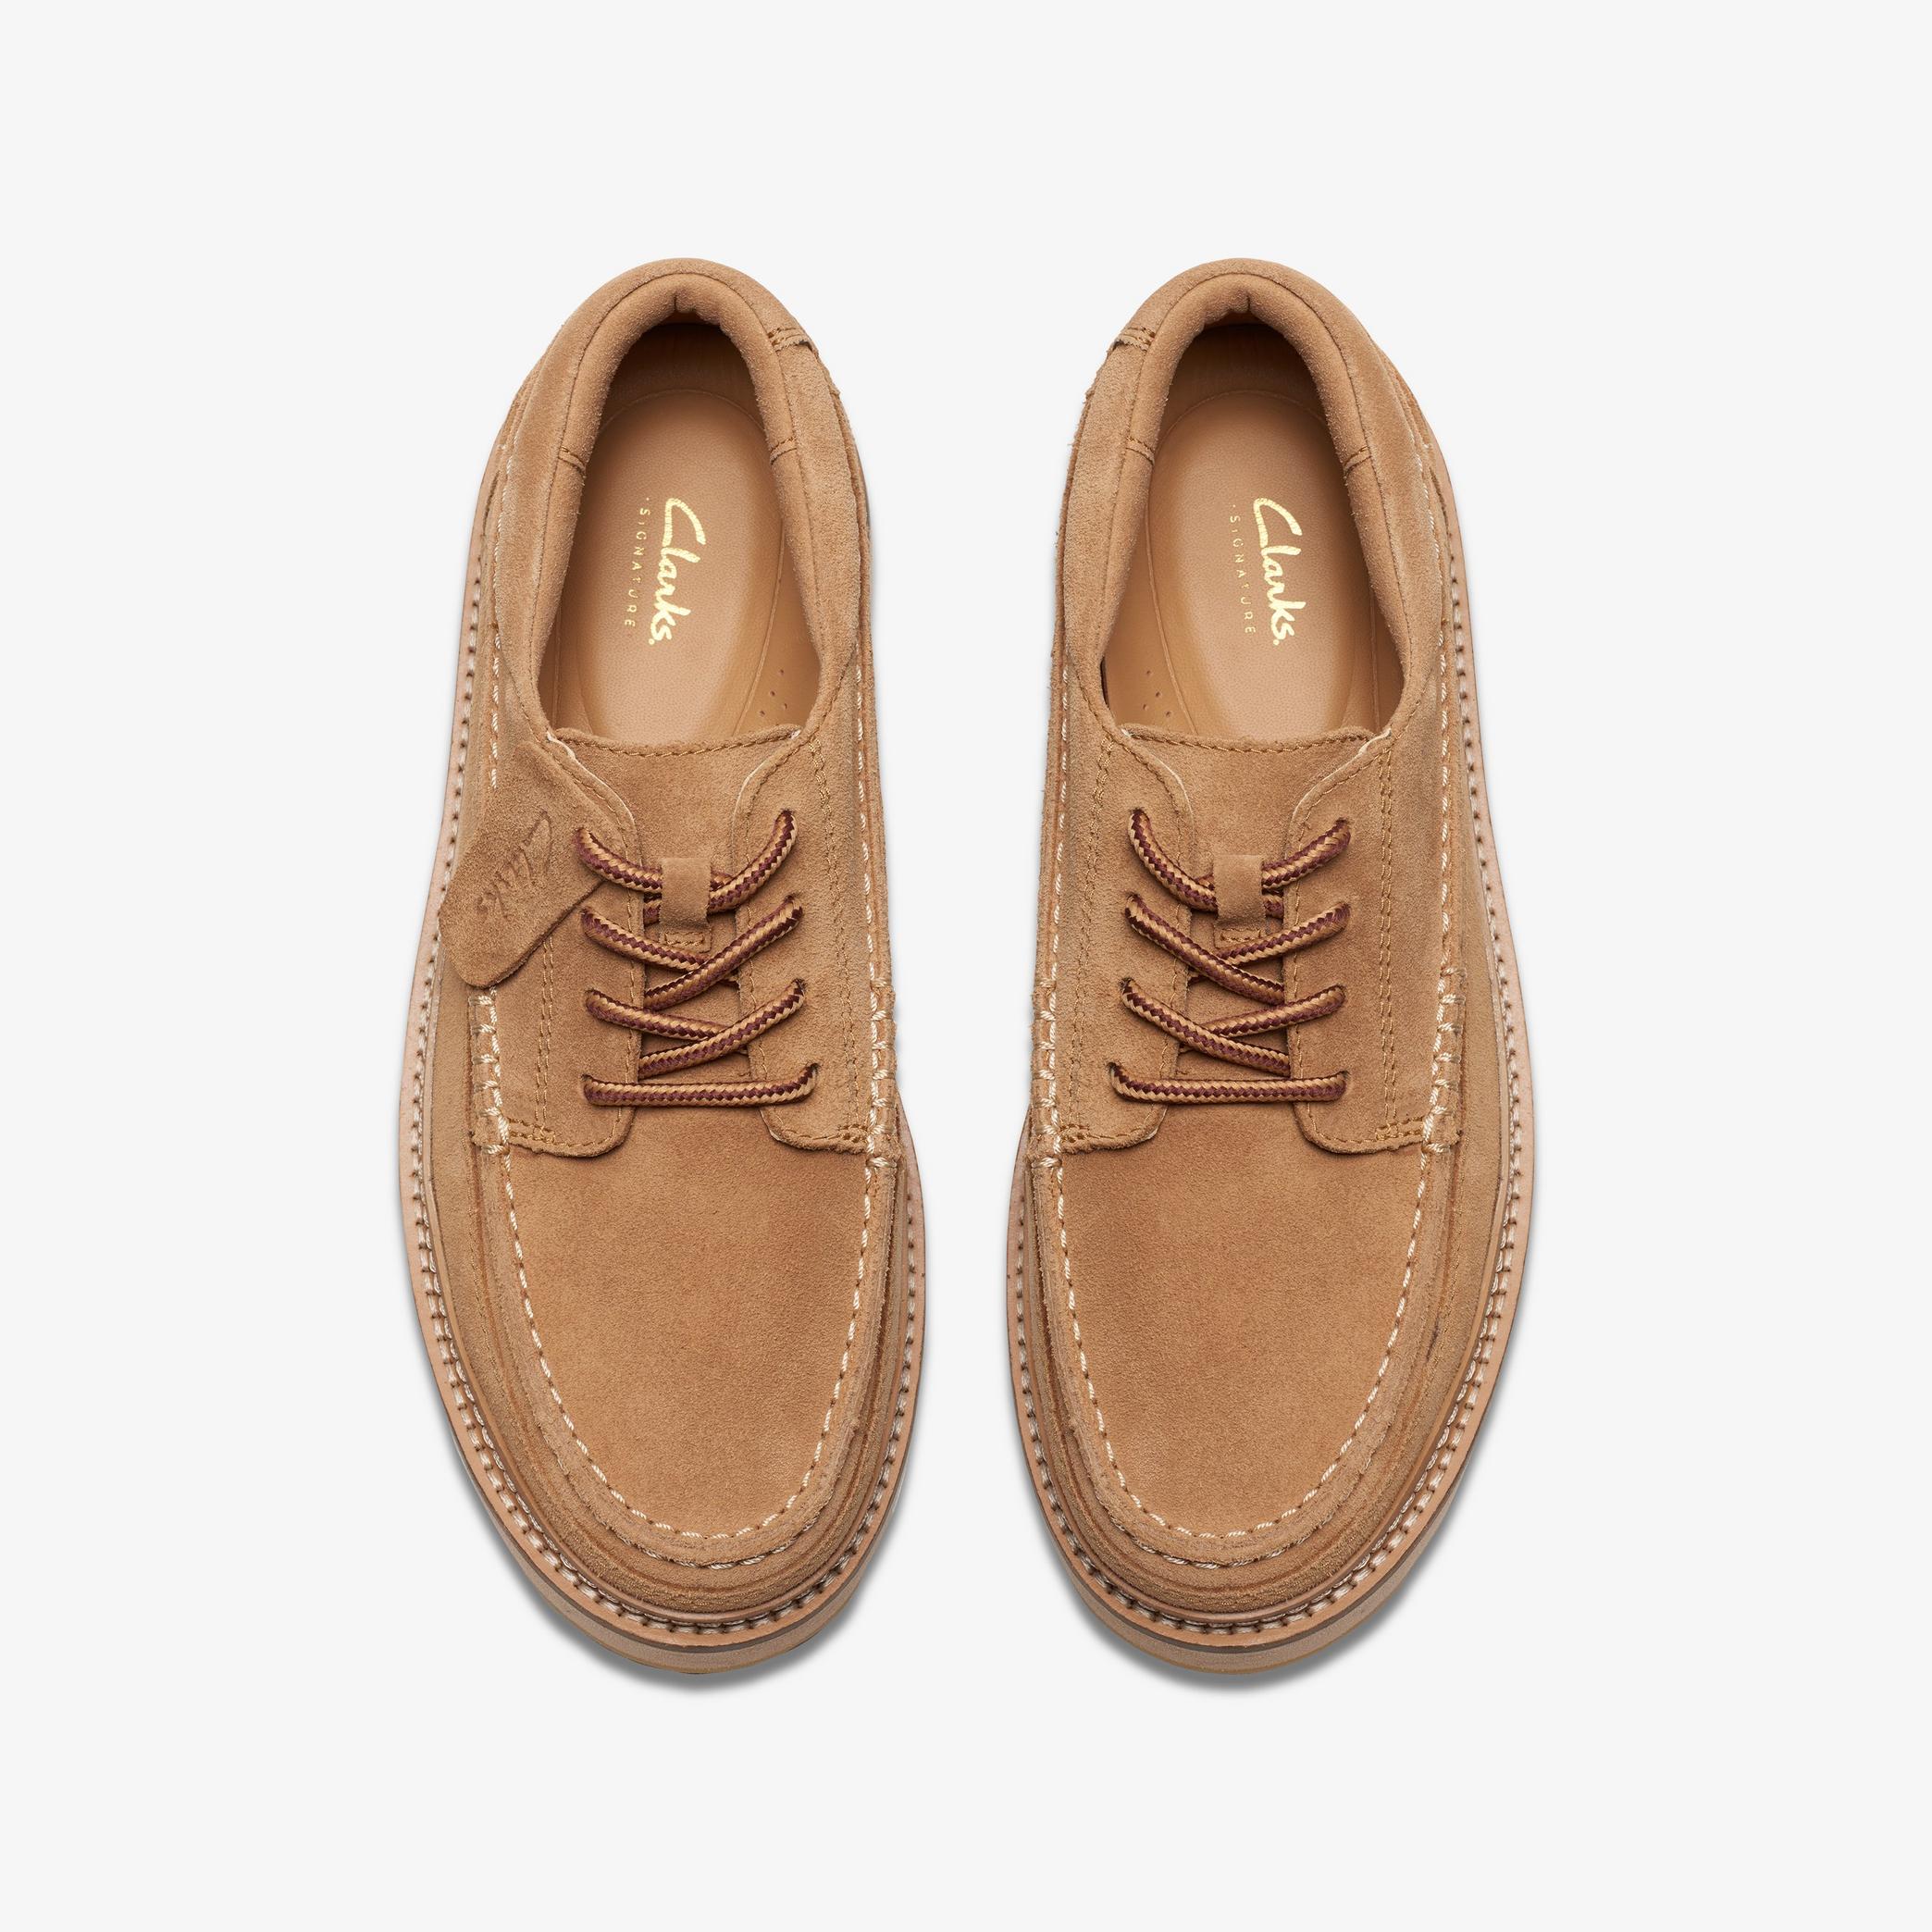 Clarkhill Lace Light Tan Suede Moccasins, view 6 of 6